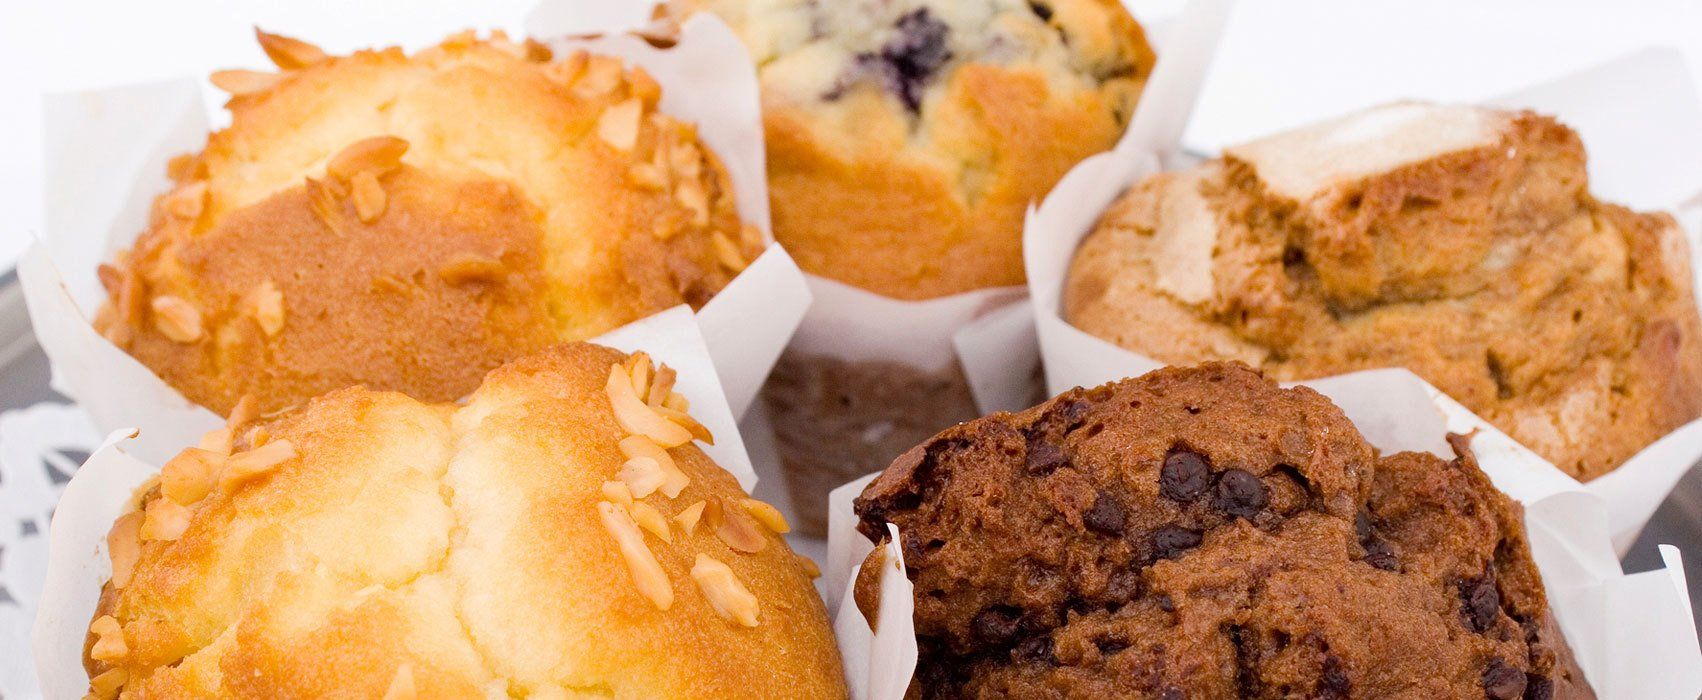 muffins from Jonathan Lord Cheesecakes & Desserts in Bohemia, NY